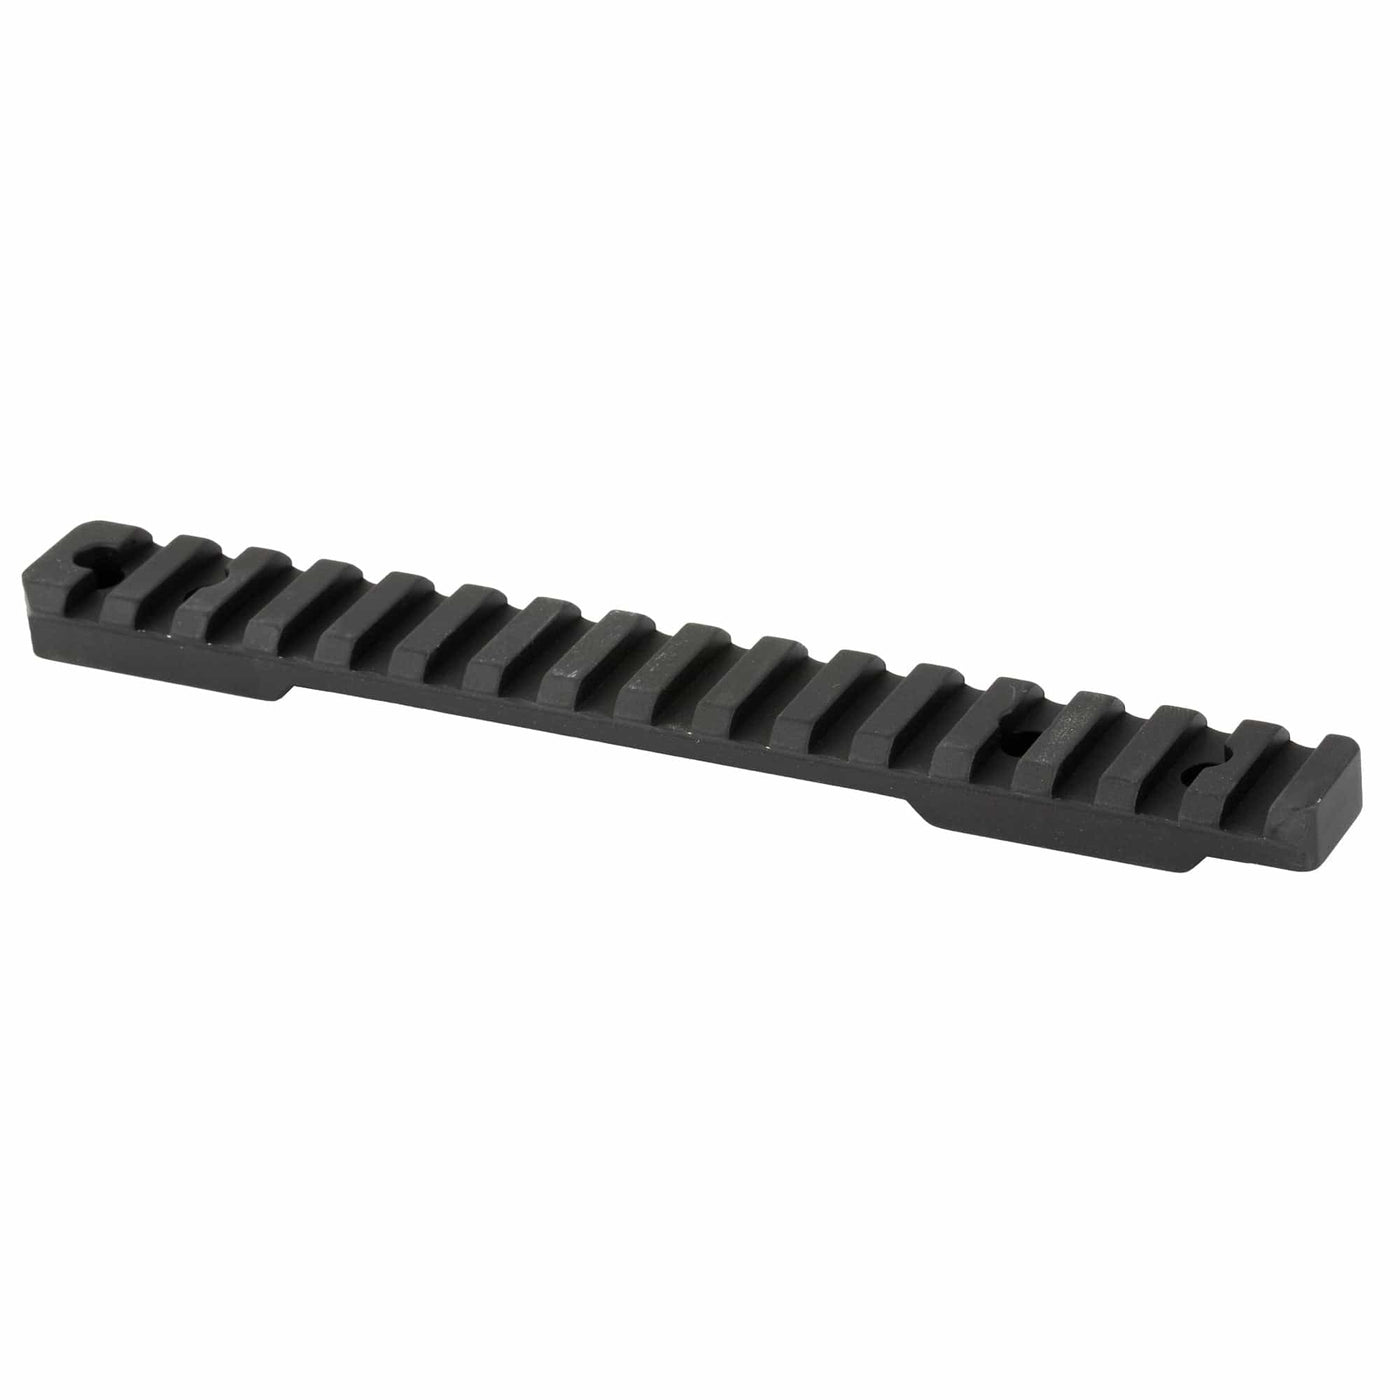 Talley Manufacturing Talley Pic Base For Wby Lghtwht 6lug Scope Mounts